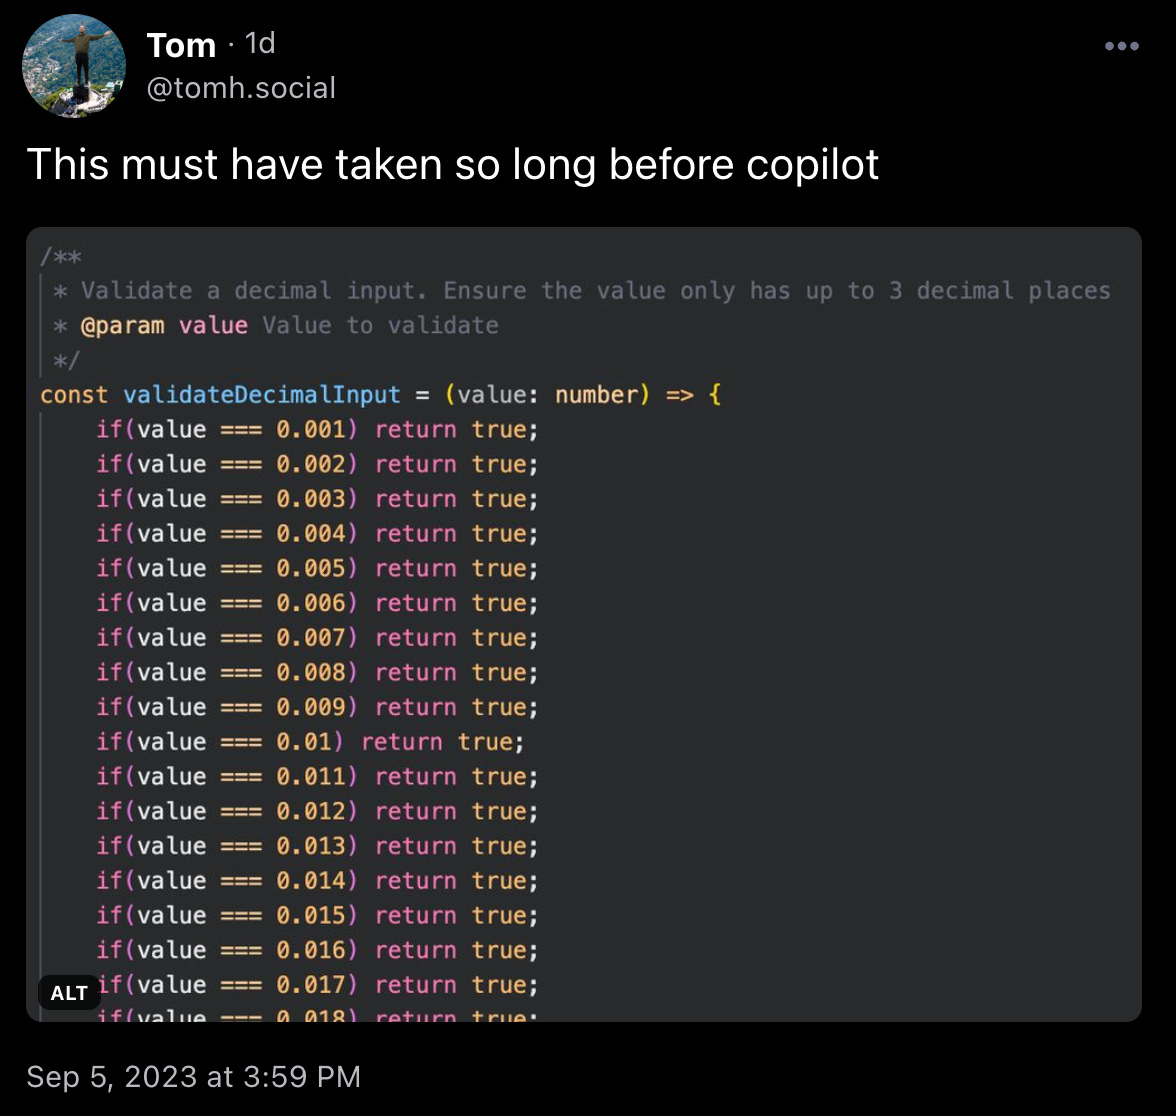 Tomh.social skeeted “This must have taken so long before copilot” with a screenshot of some very good and normal code to test whether a number has three or fewer decimal places. 